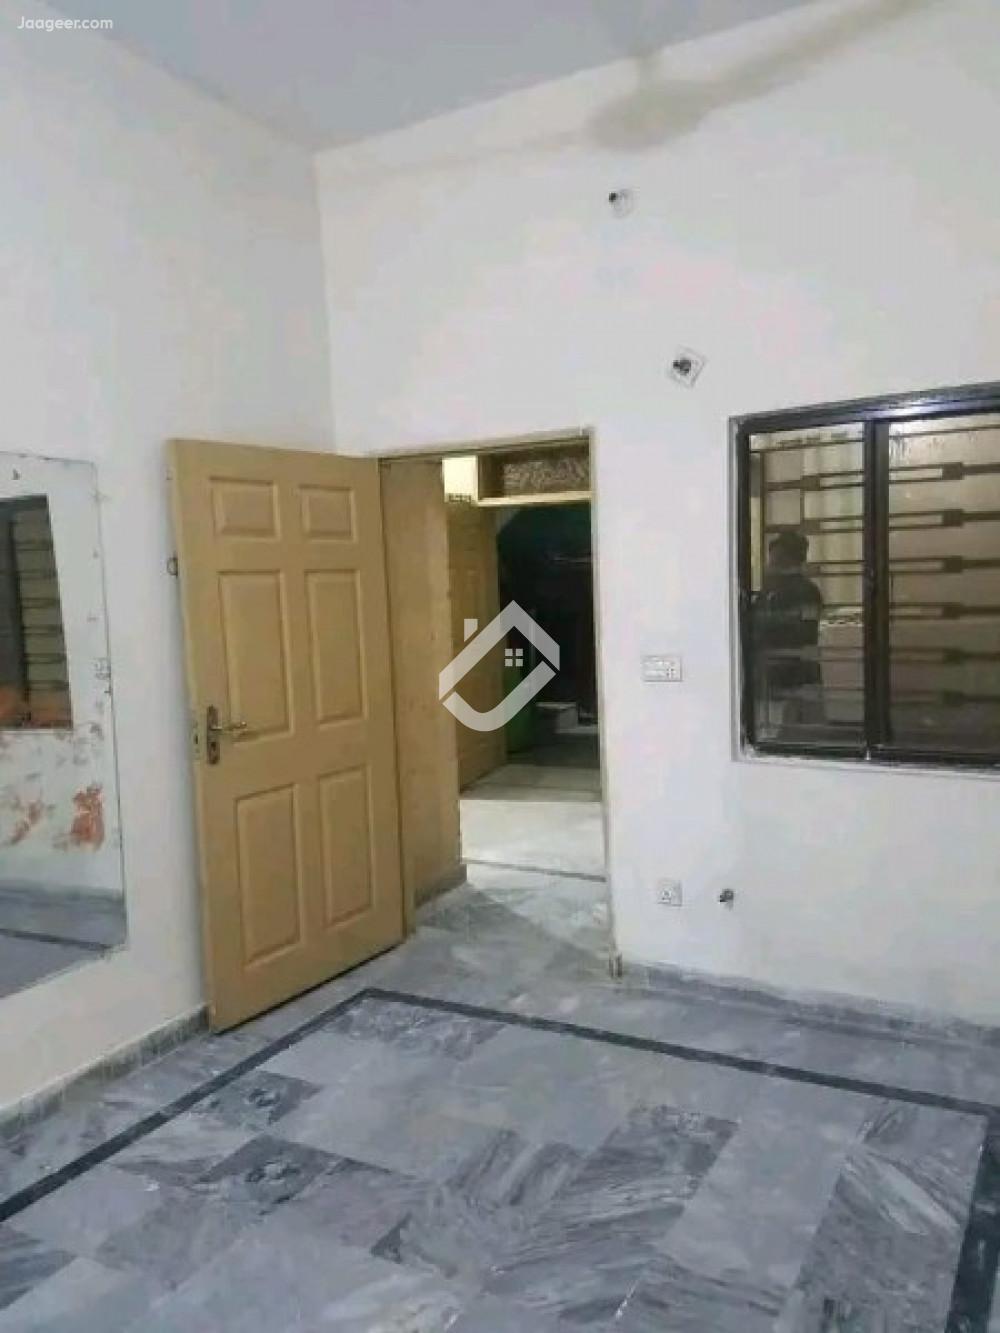 View  3 Marla Upper Portion For Rent In Wakeel Colony Near Gulzrar-E- Quaid  in Wakeel Colony , Rawalpindi